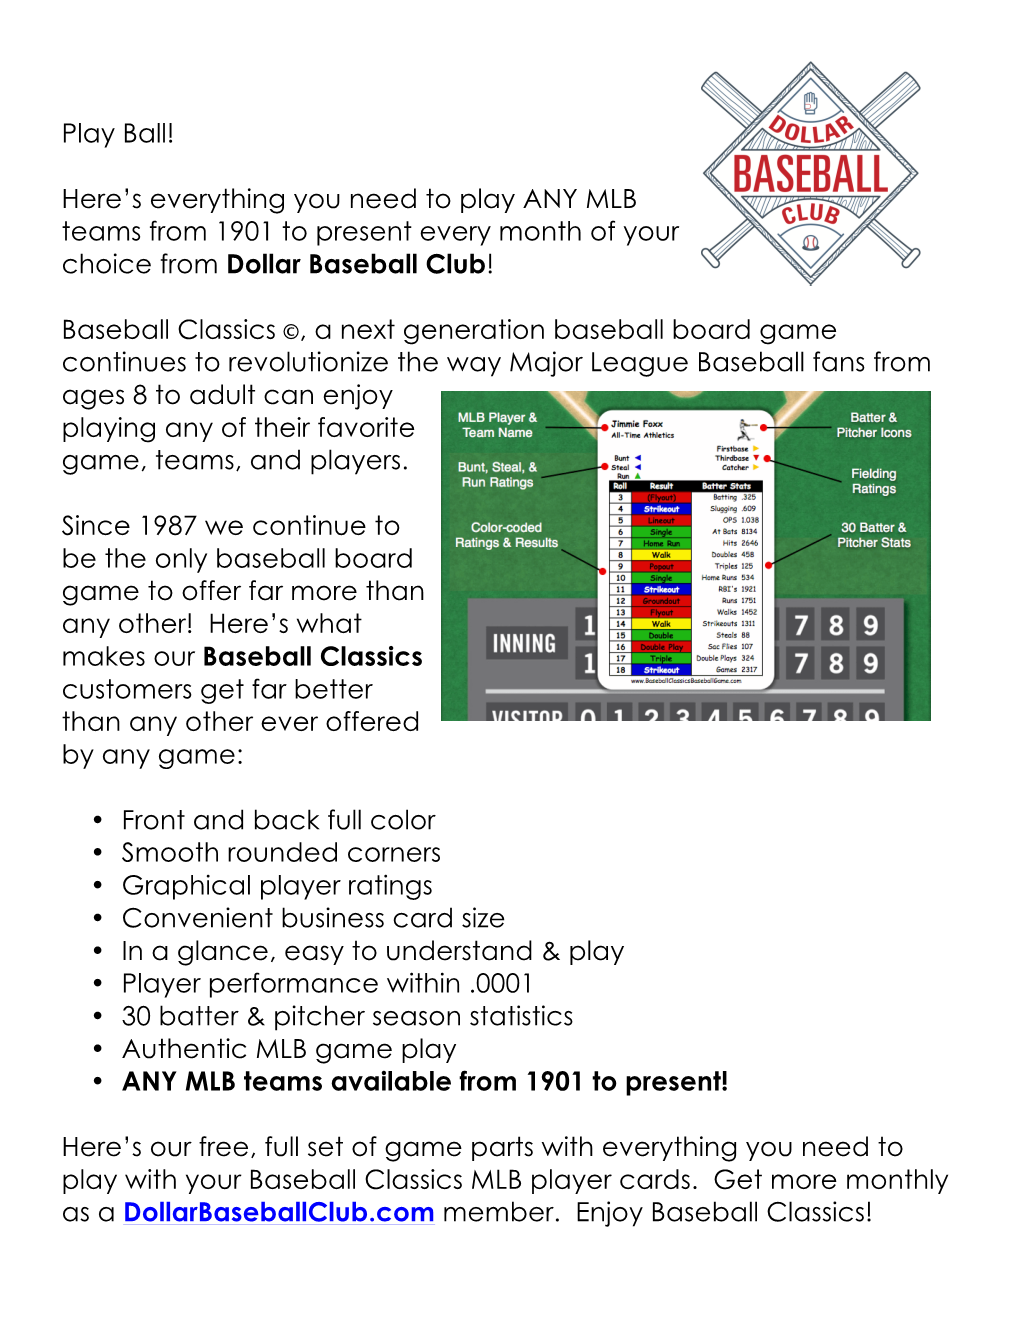 Play Ball! Here's Everything You Need to Play ANY MLB Teams from 1901 to Present Every Month of Your Choice from Dollar Baseba